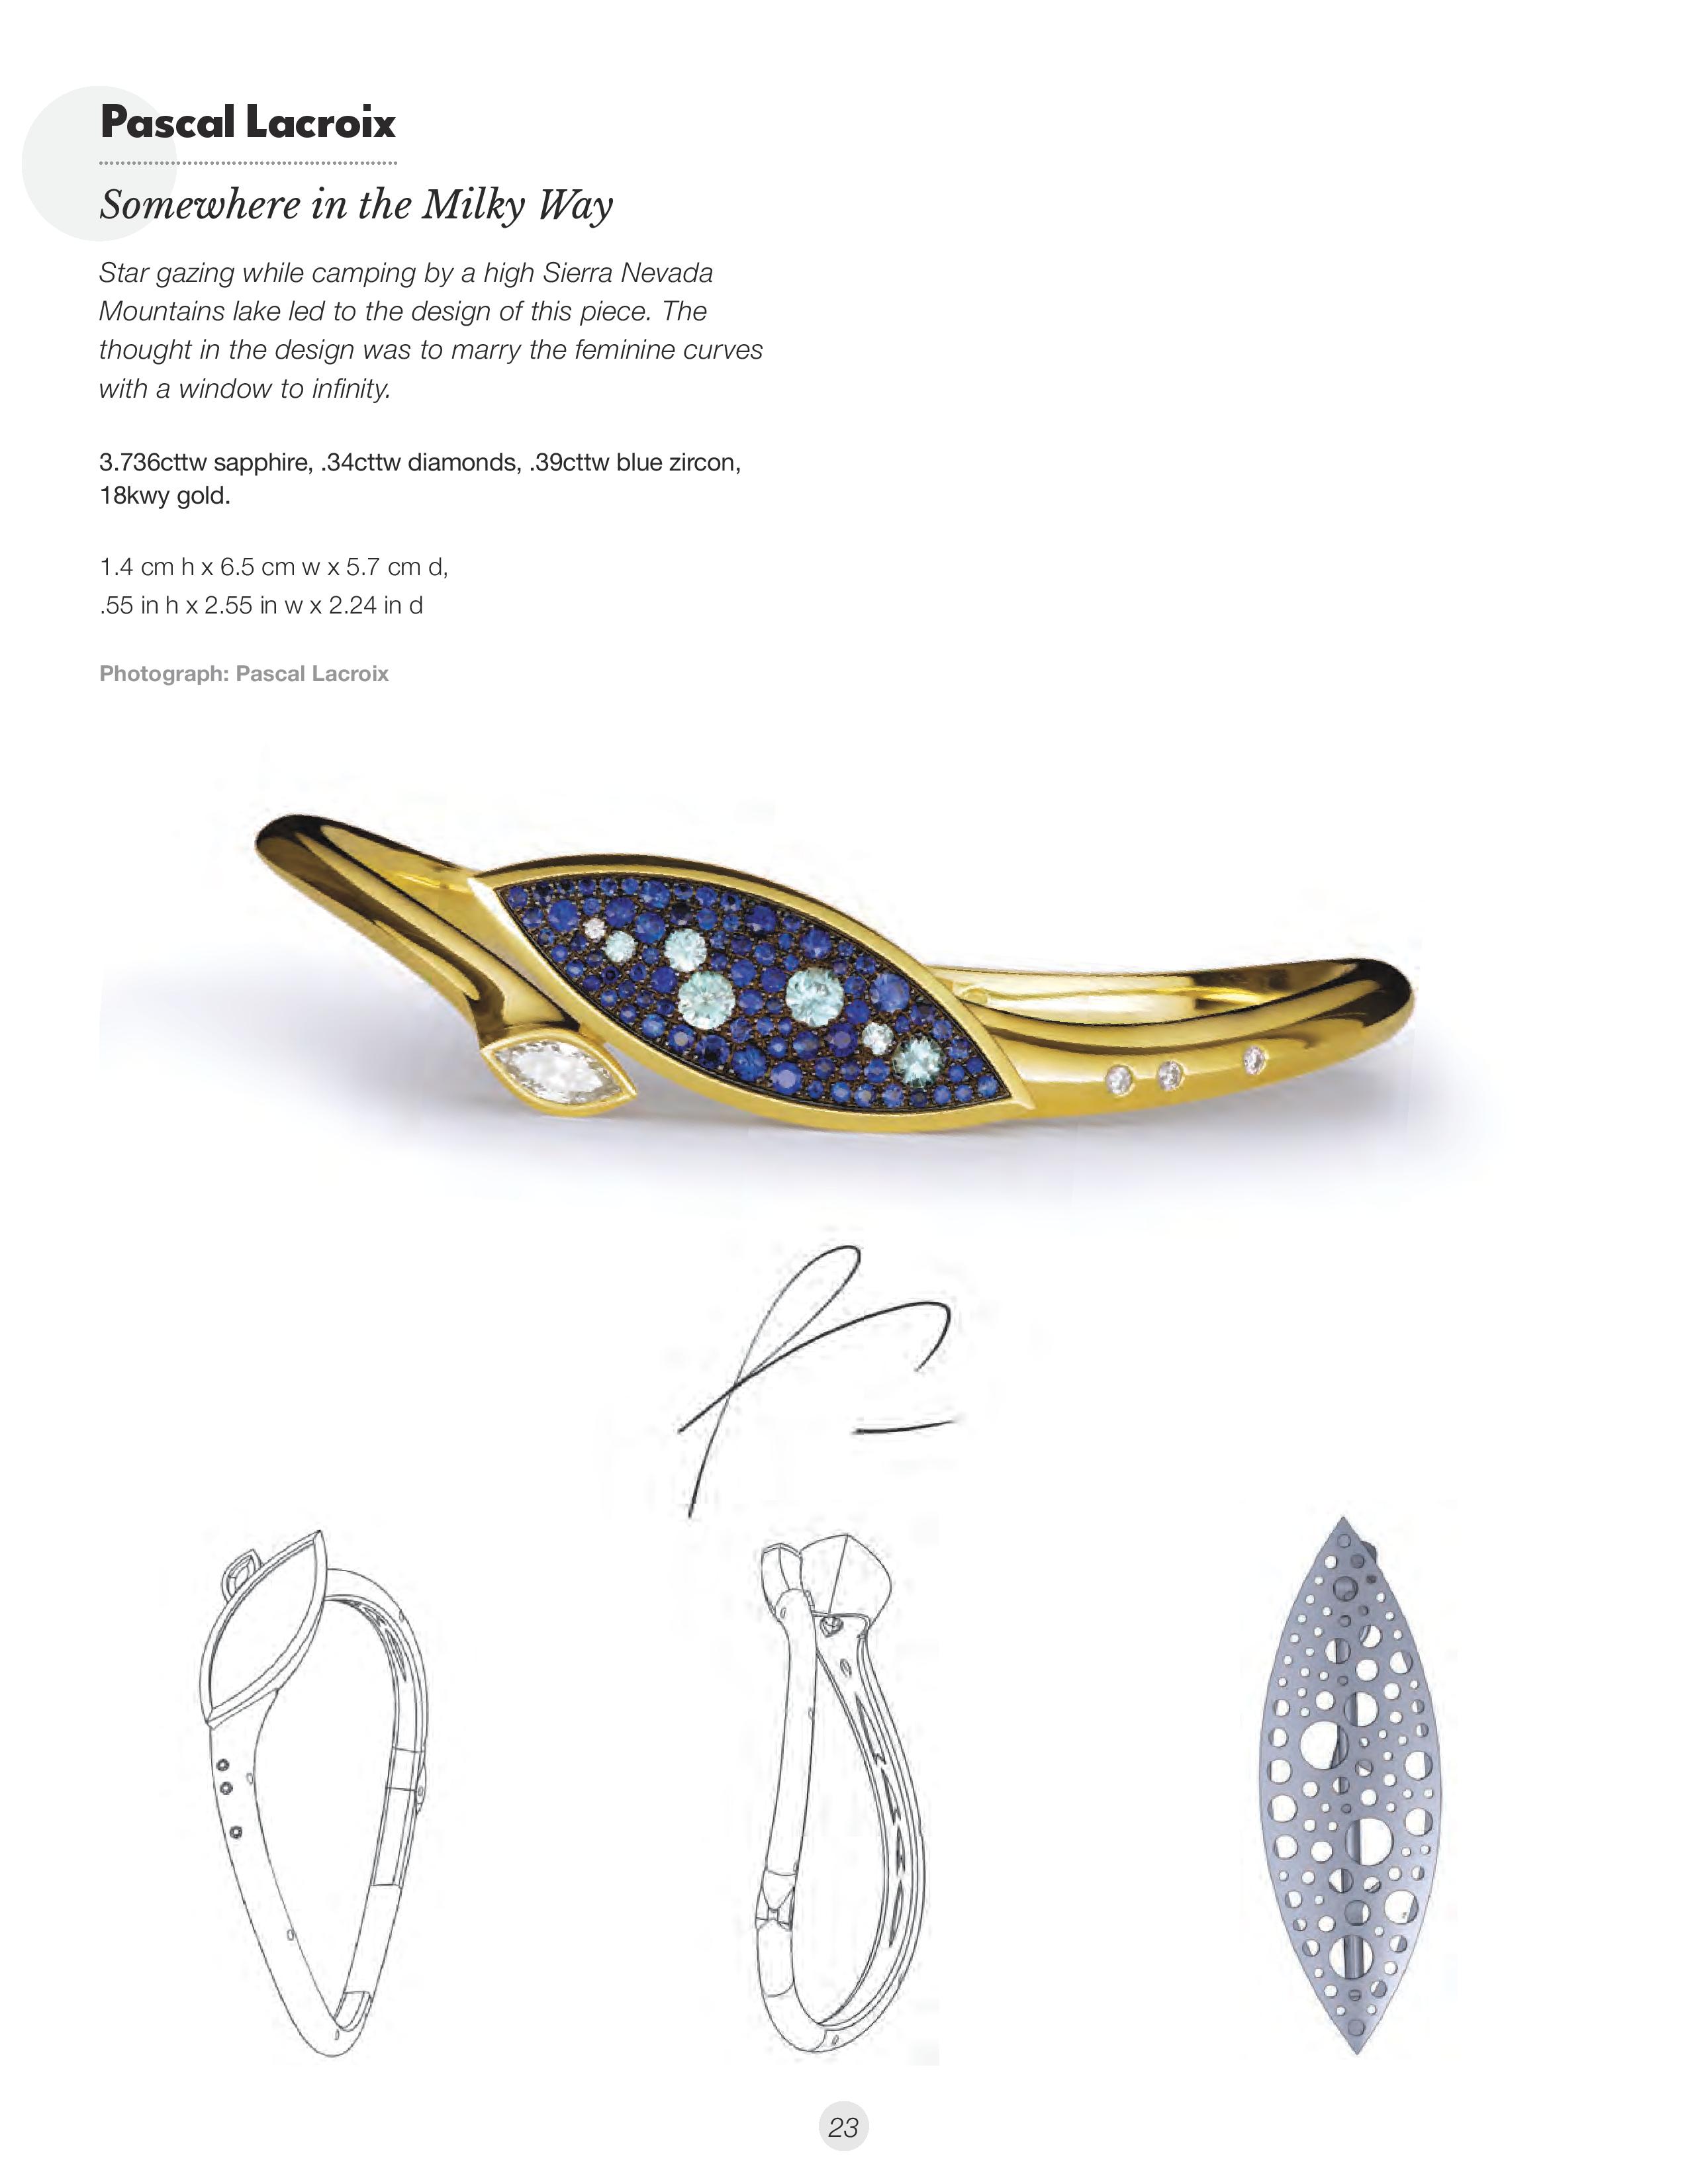 AJDC Polka Dot Page 023 - American Jewelry Design Council